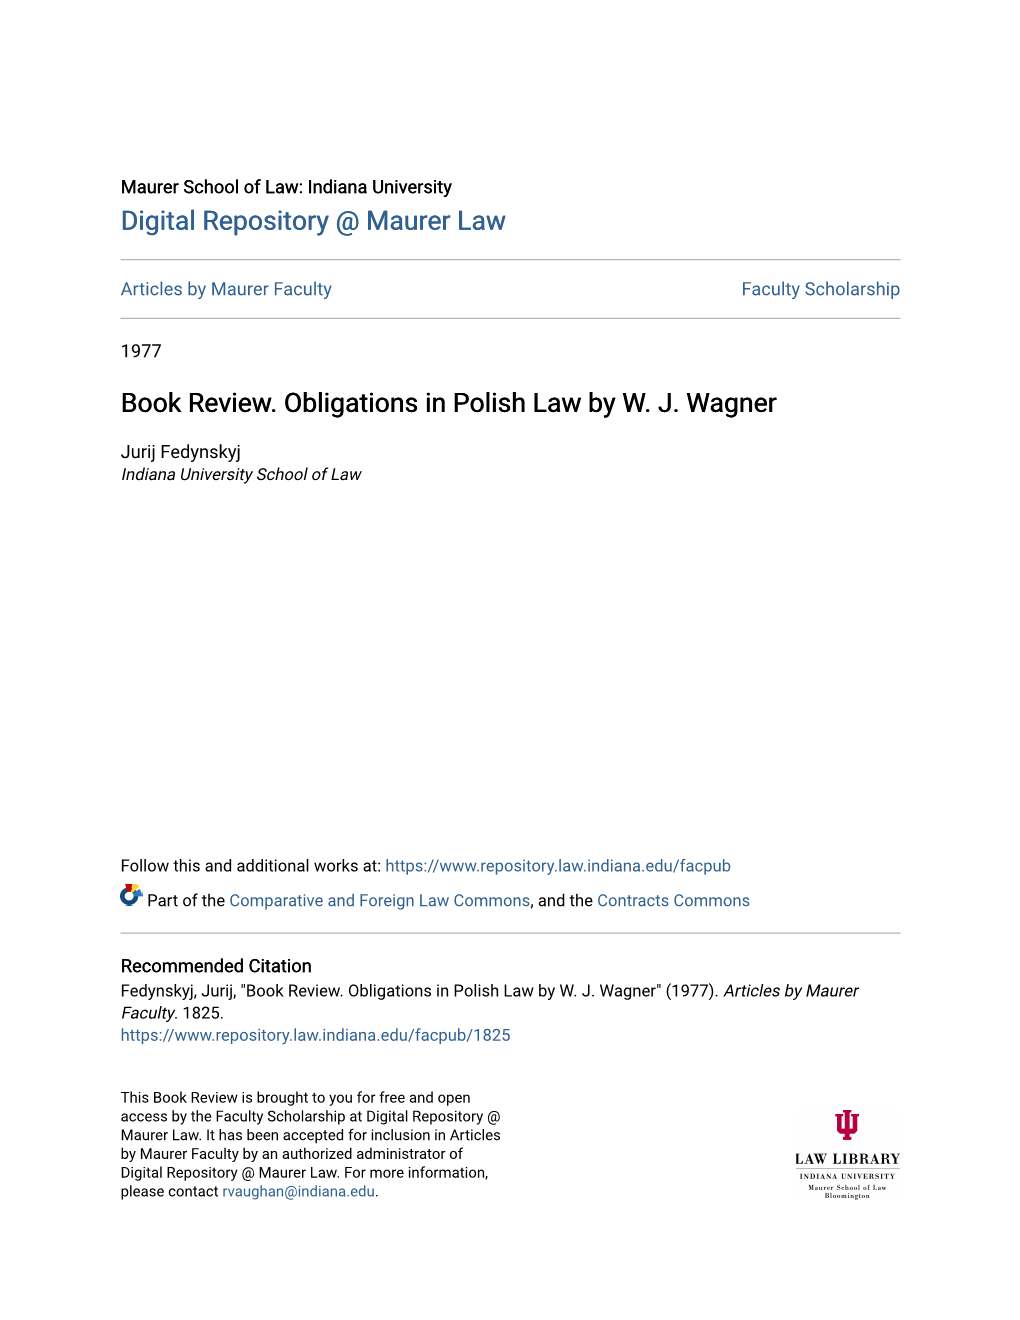 Book Review. Obligations in Polish Law by W. J. Wagner